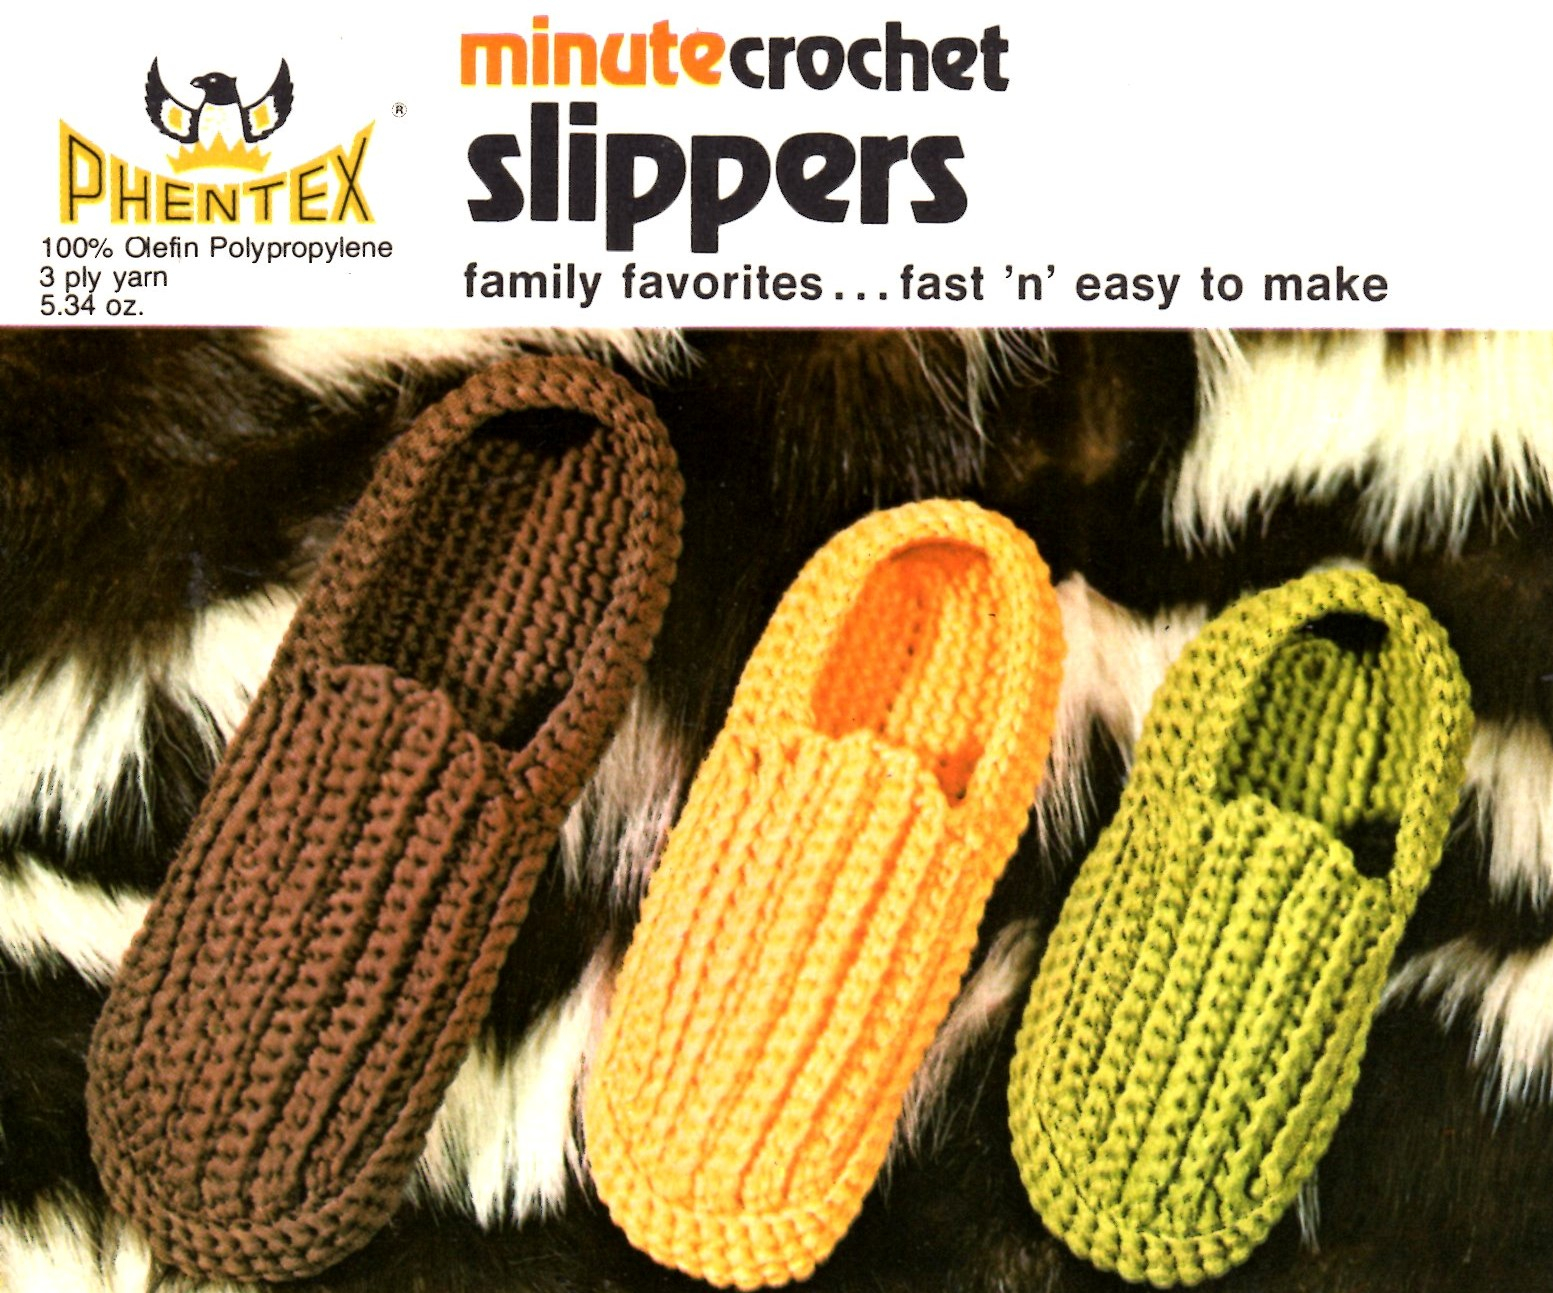 Simple Crochet Slippers Pattern Minute Crochet Slippers For The Whole Family Fast And Easy To Make